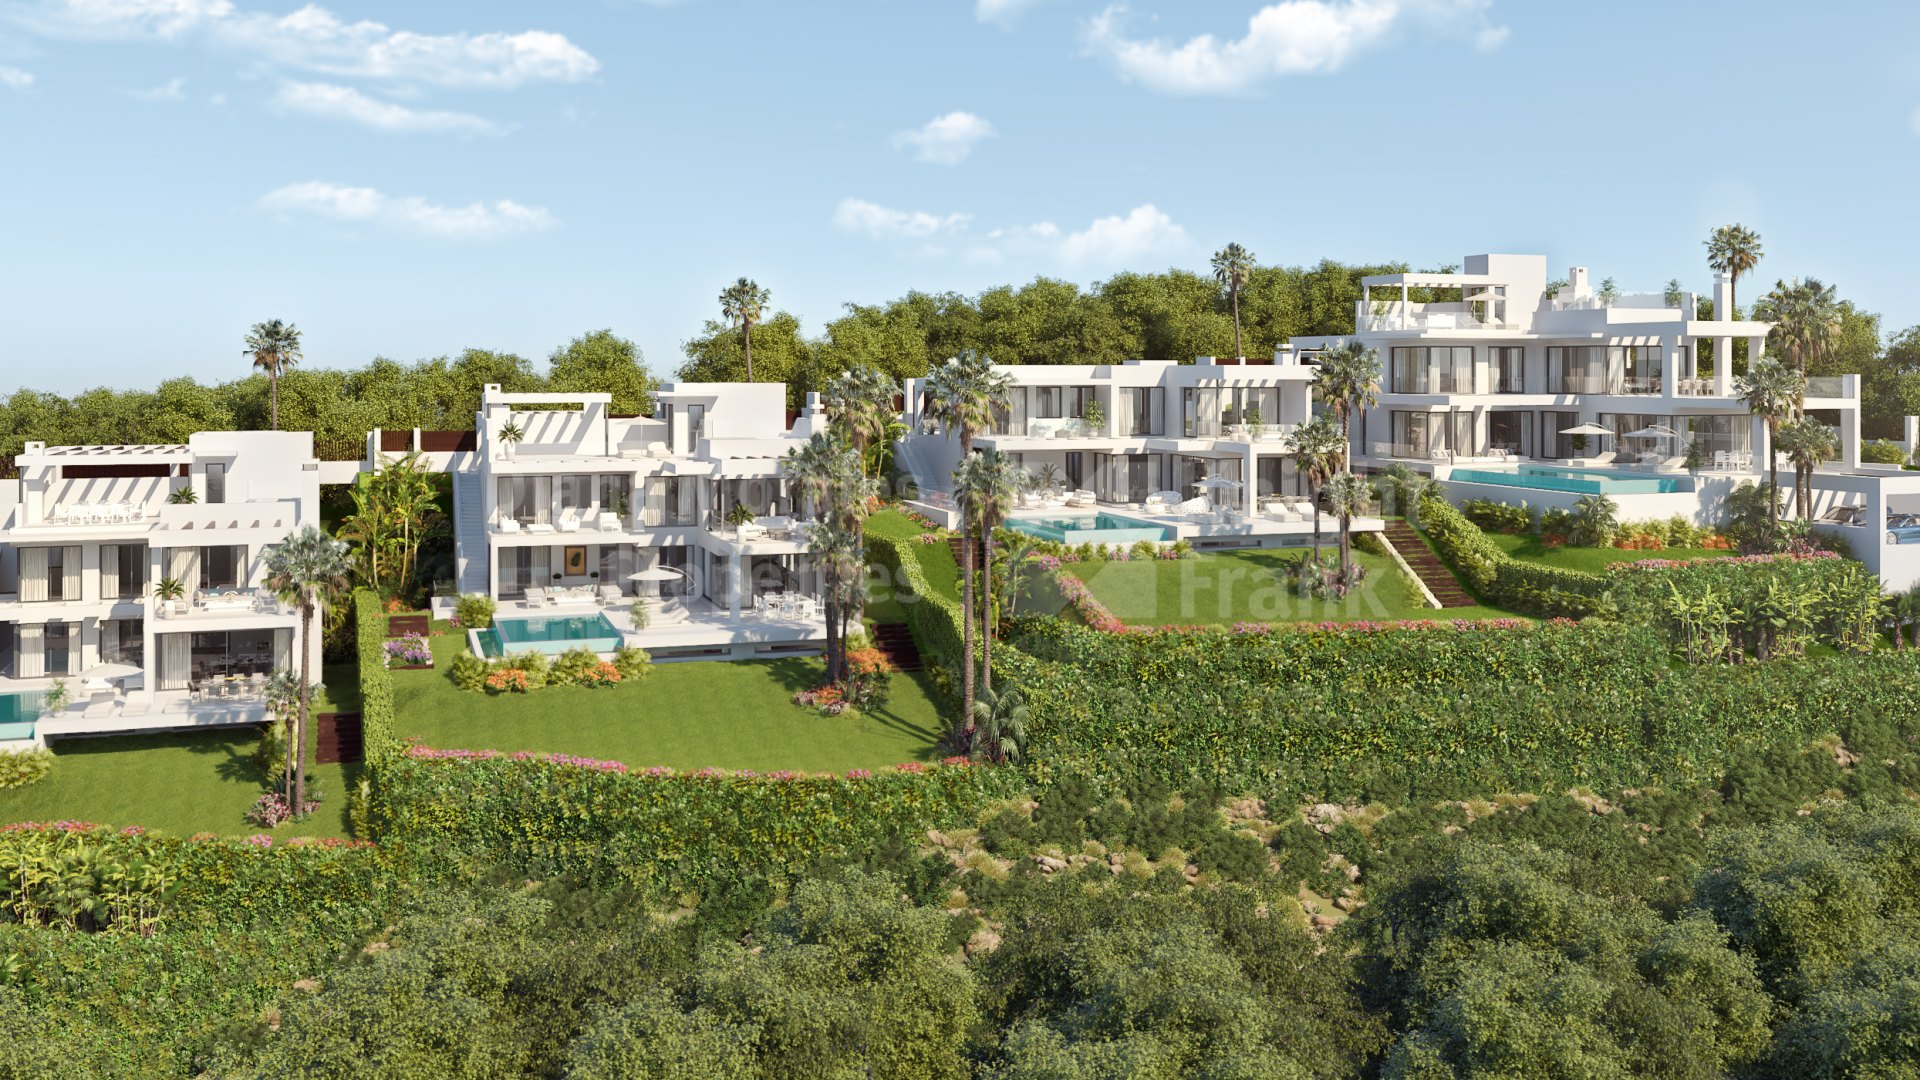 The View Luxury Villas , Delightful views for a complex of only 49 units